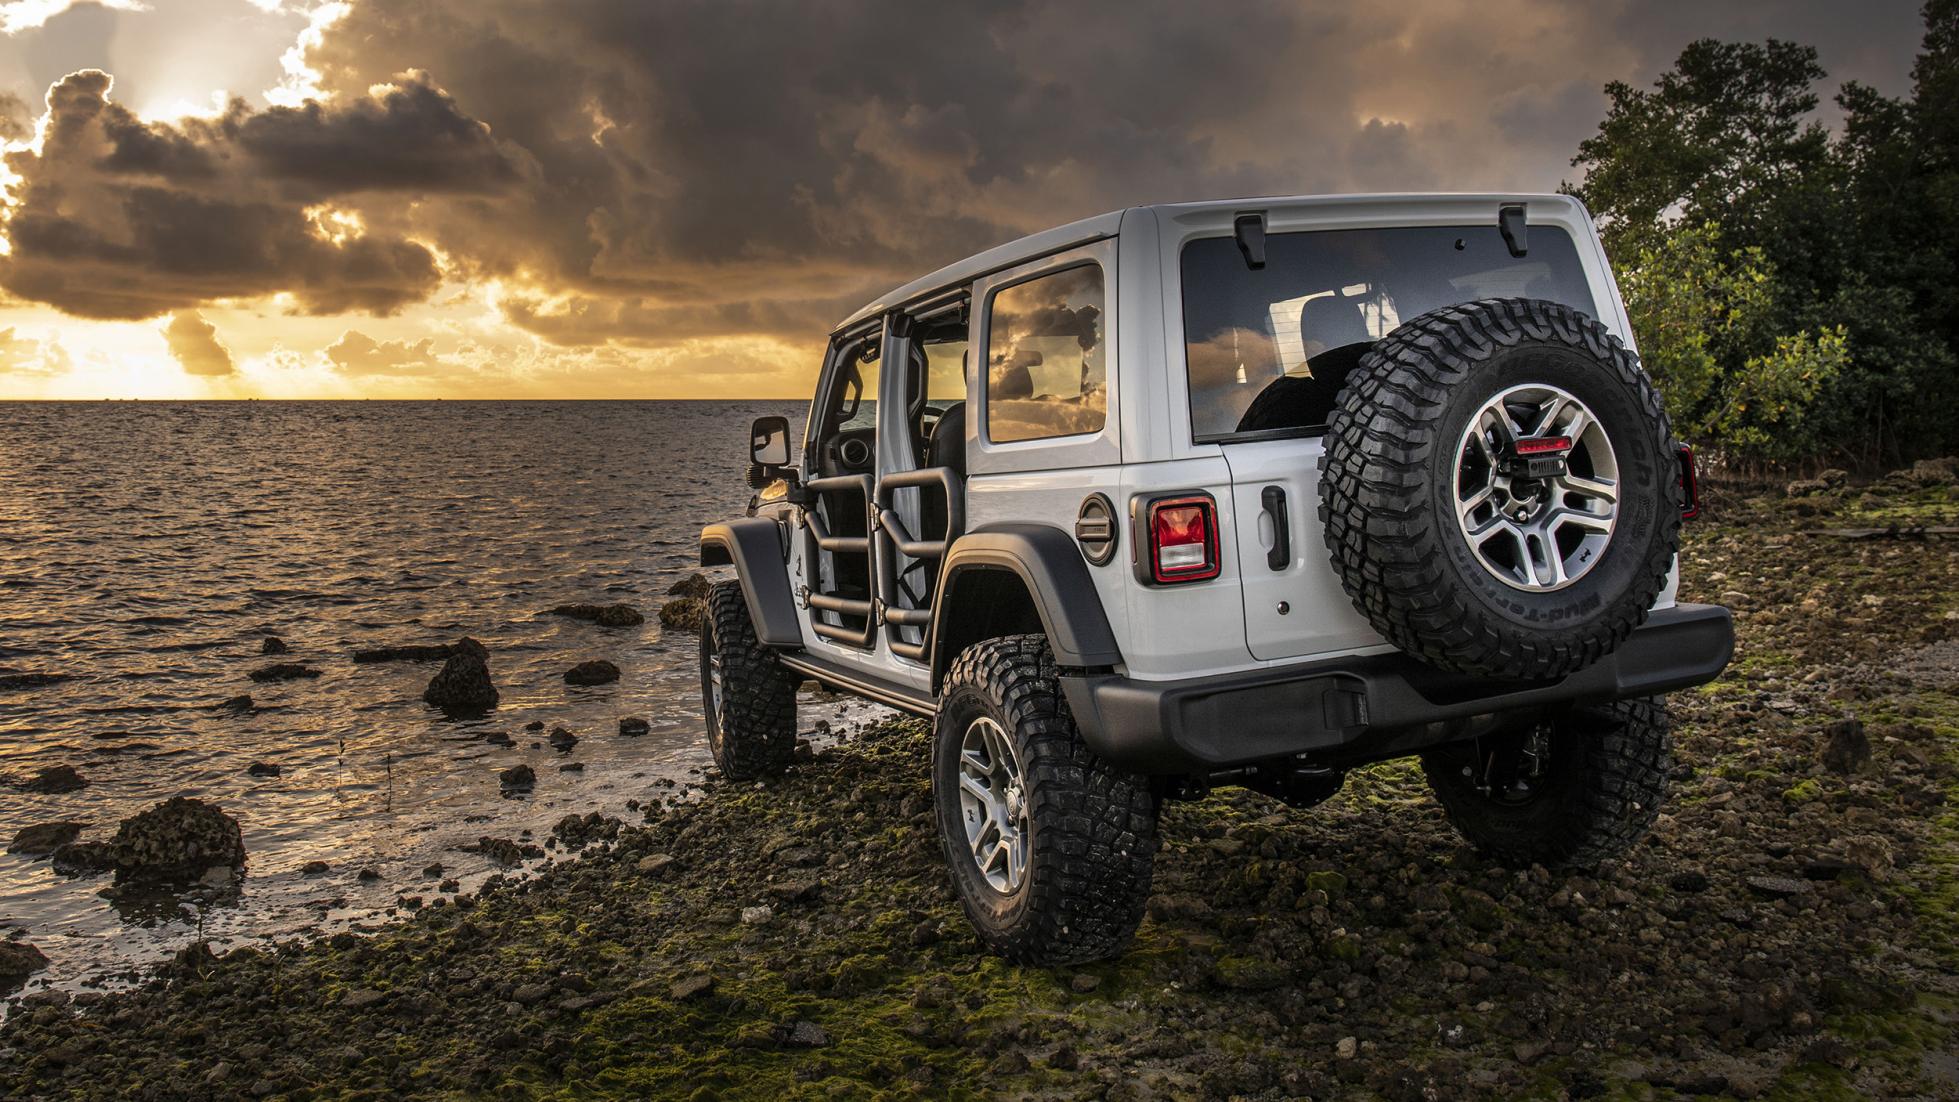 These special edition Jeeps celebrate the city of Miami